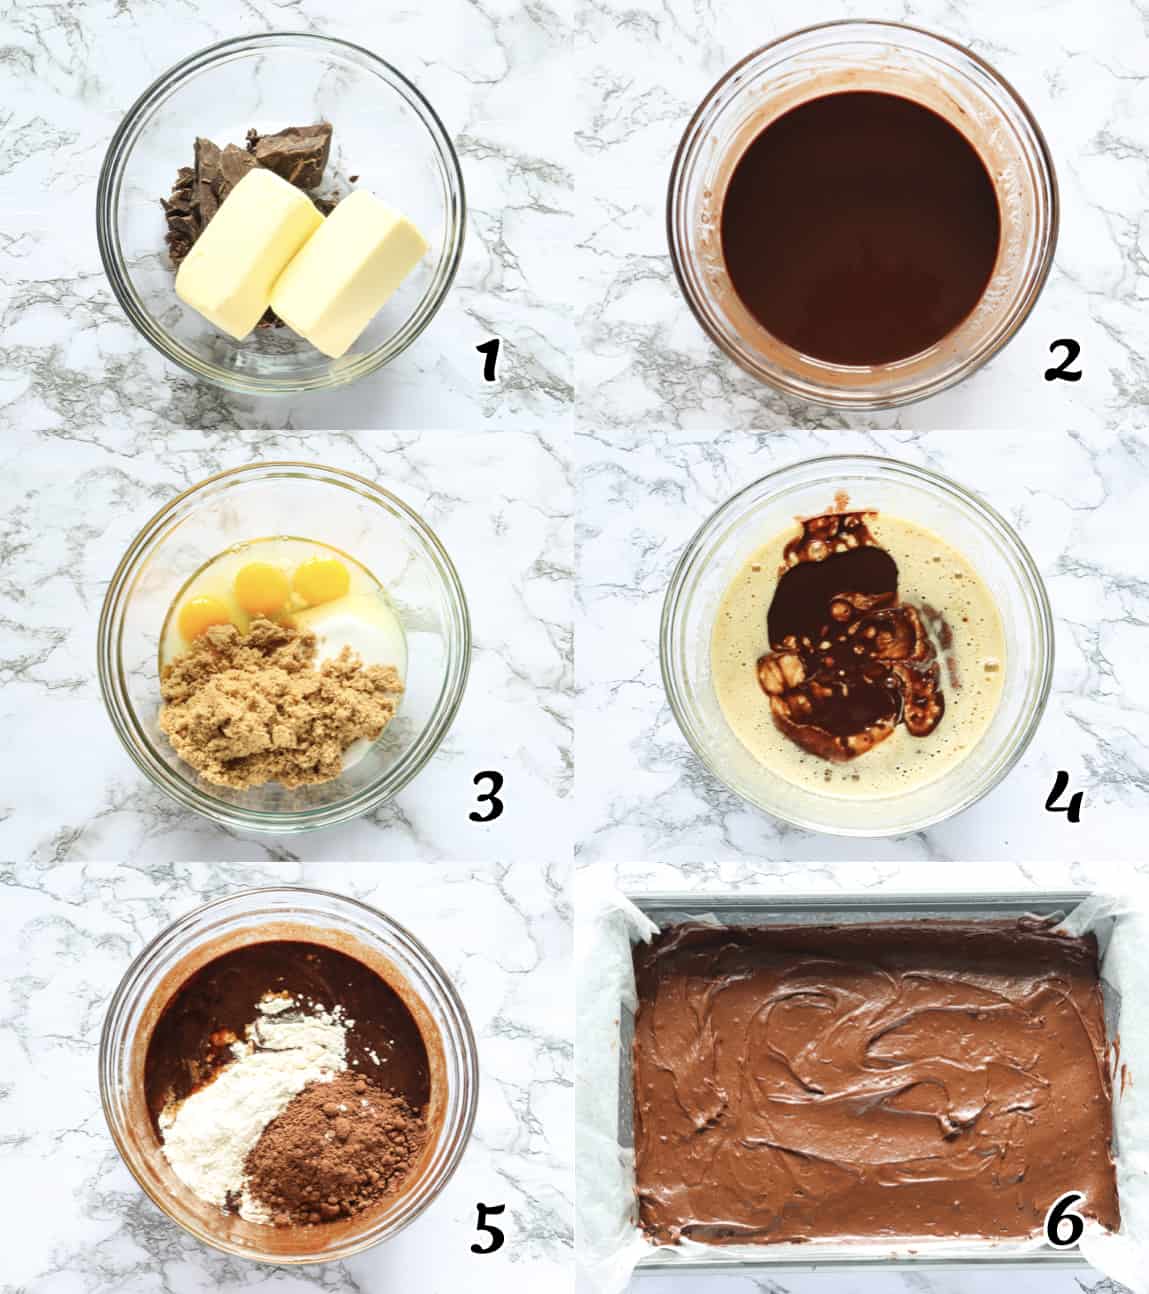 Melt the chocolate, beat eggs and sugar, mix it all together, and bake